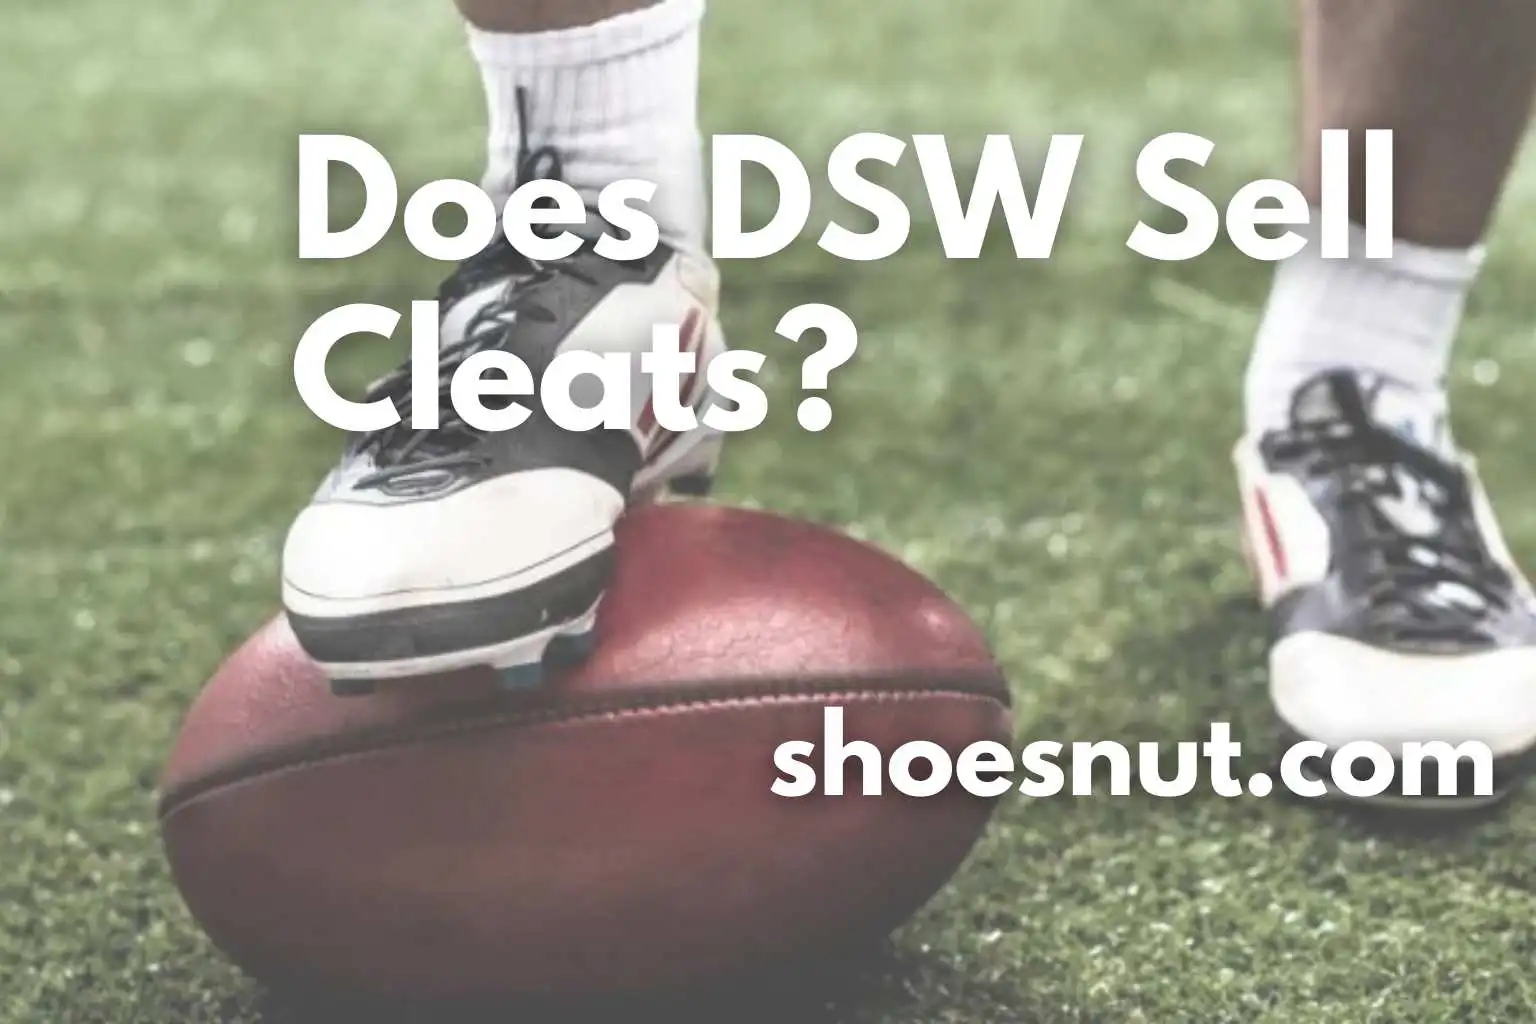 Does DSW Sell Cleats?